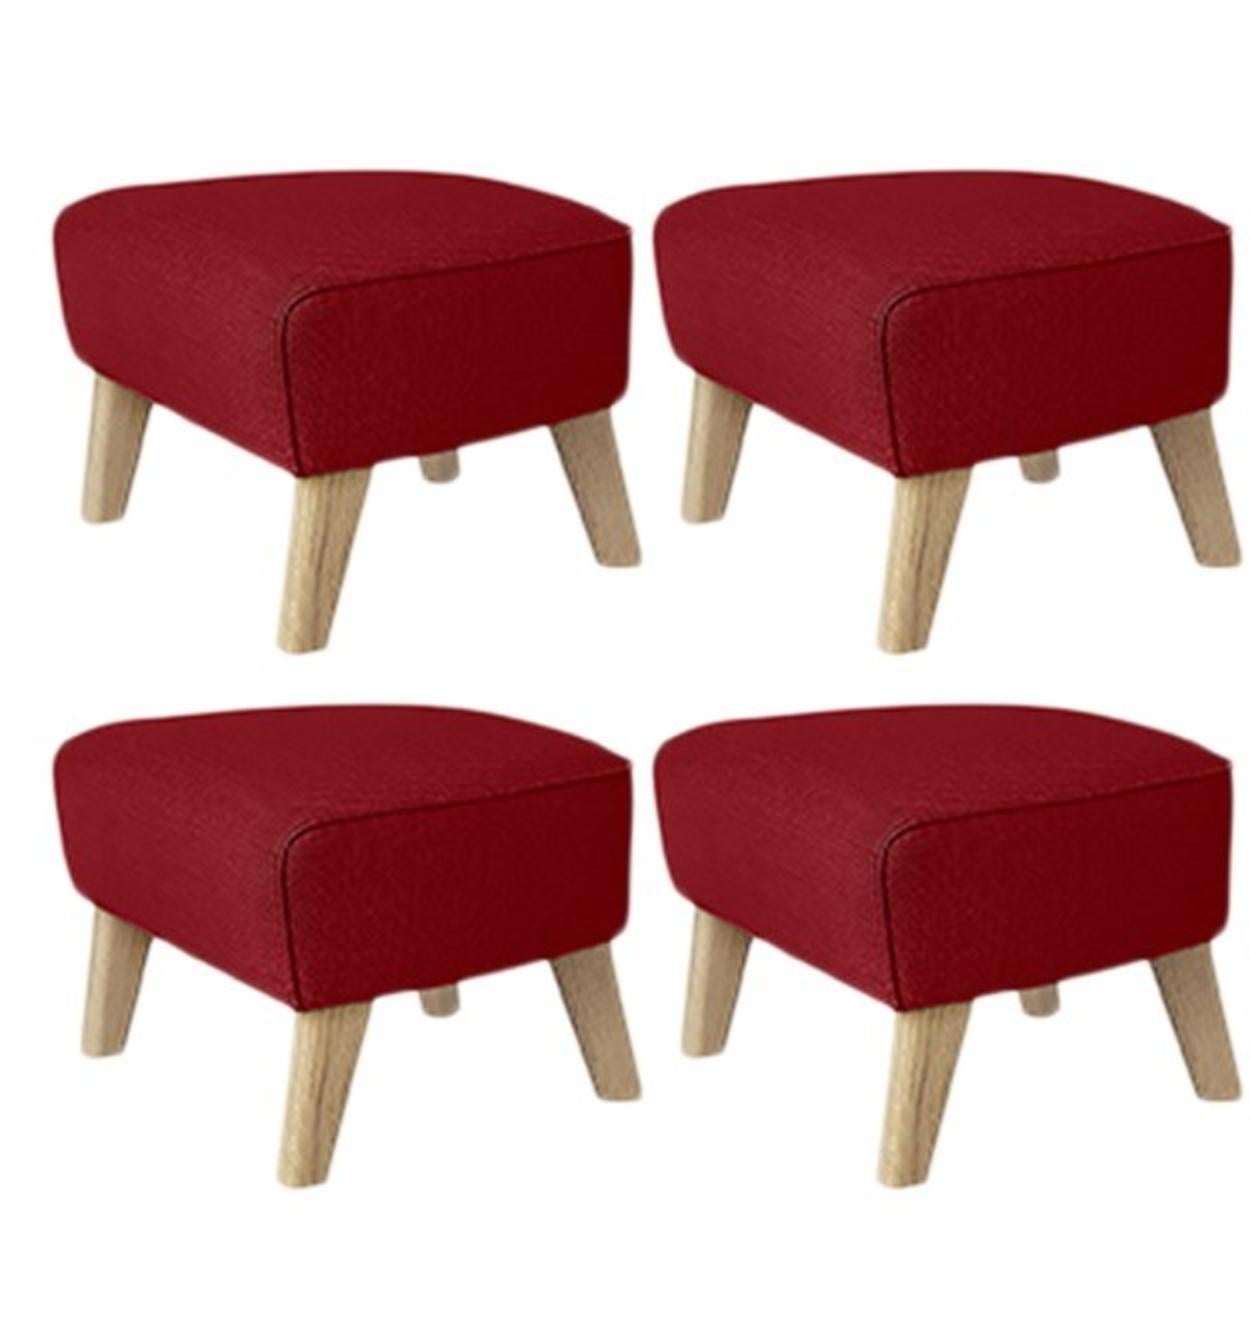 Set of 4 red, natural oak Raf Simons Vidar 3 my own chair footstool by Lassen
Dimensions: w 56 x d 58 x h 40 cm 
Materials: Textile
Also Available: Other colors available.

The My Own Chair footstool has been designed in the same spirit as